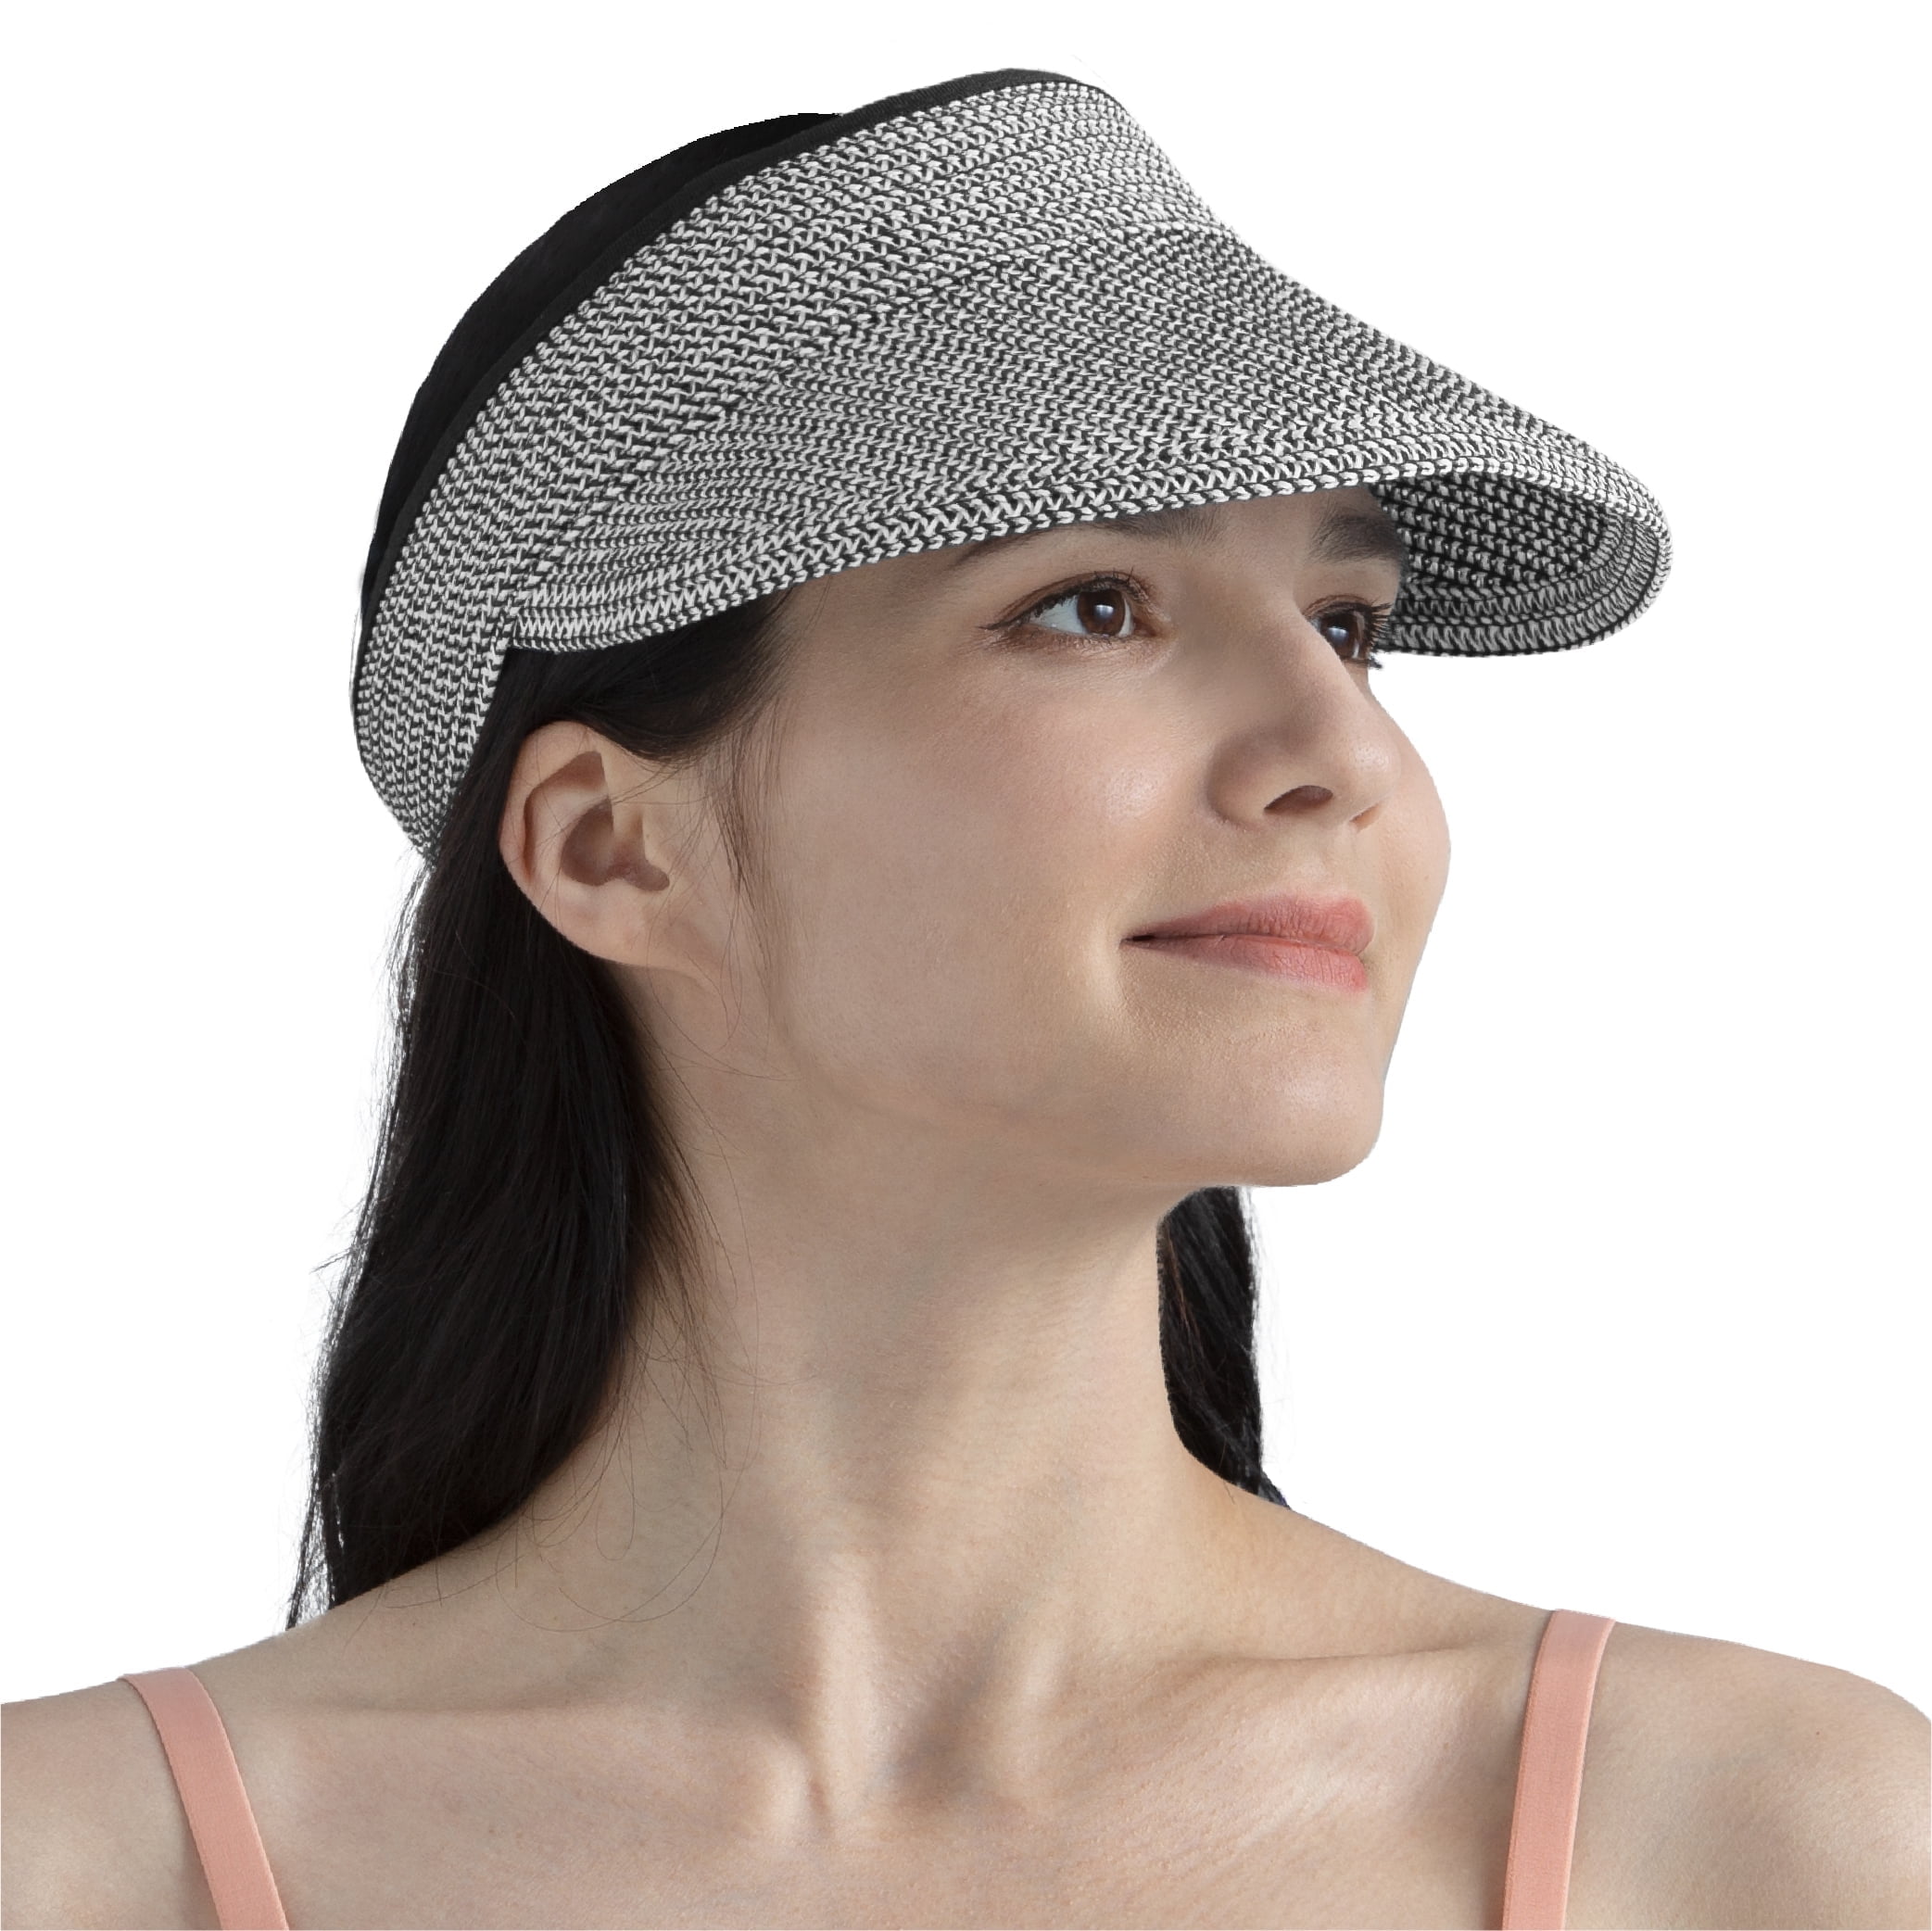 Solaris Sun Hat for Women Neck Flap Wide Brim UV Protection UPF 50+  Foldable Fishing Cap with 2 Replaceable Ribbon For Outdoor